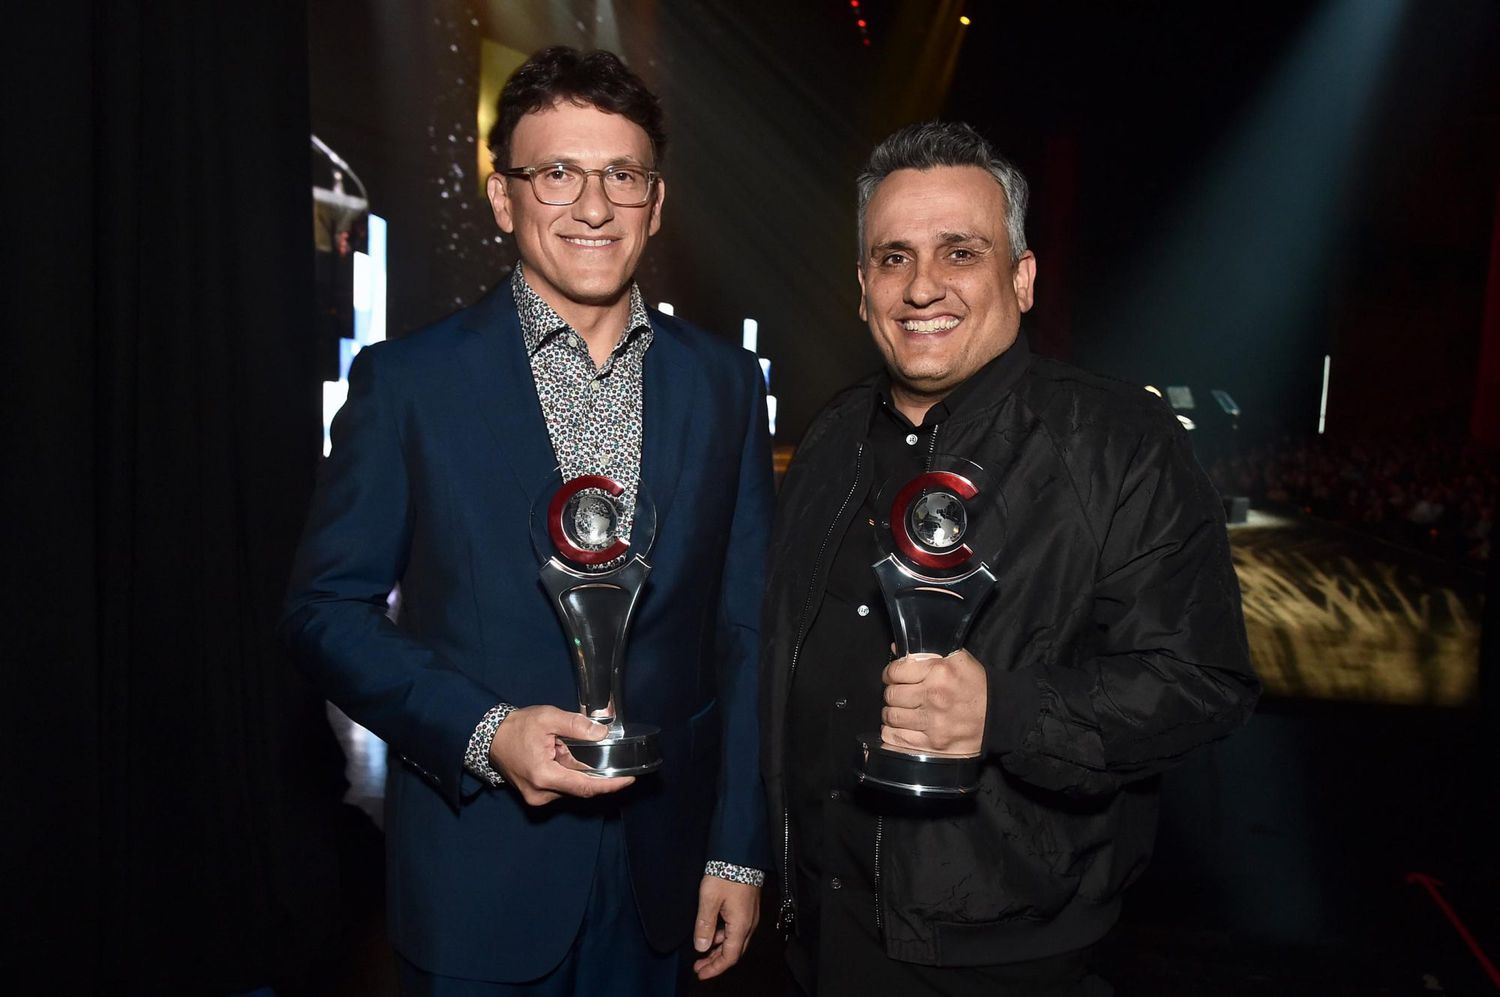 Anthony Russo and Joe Russo (Directors of the Year Award)